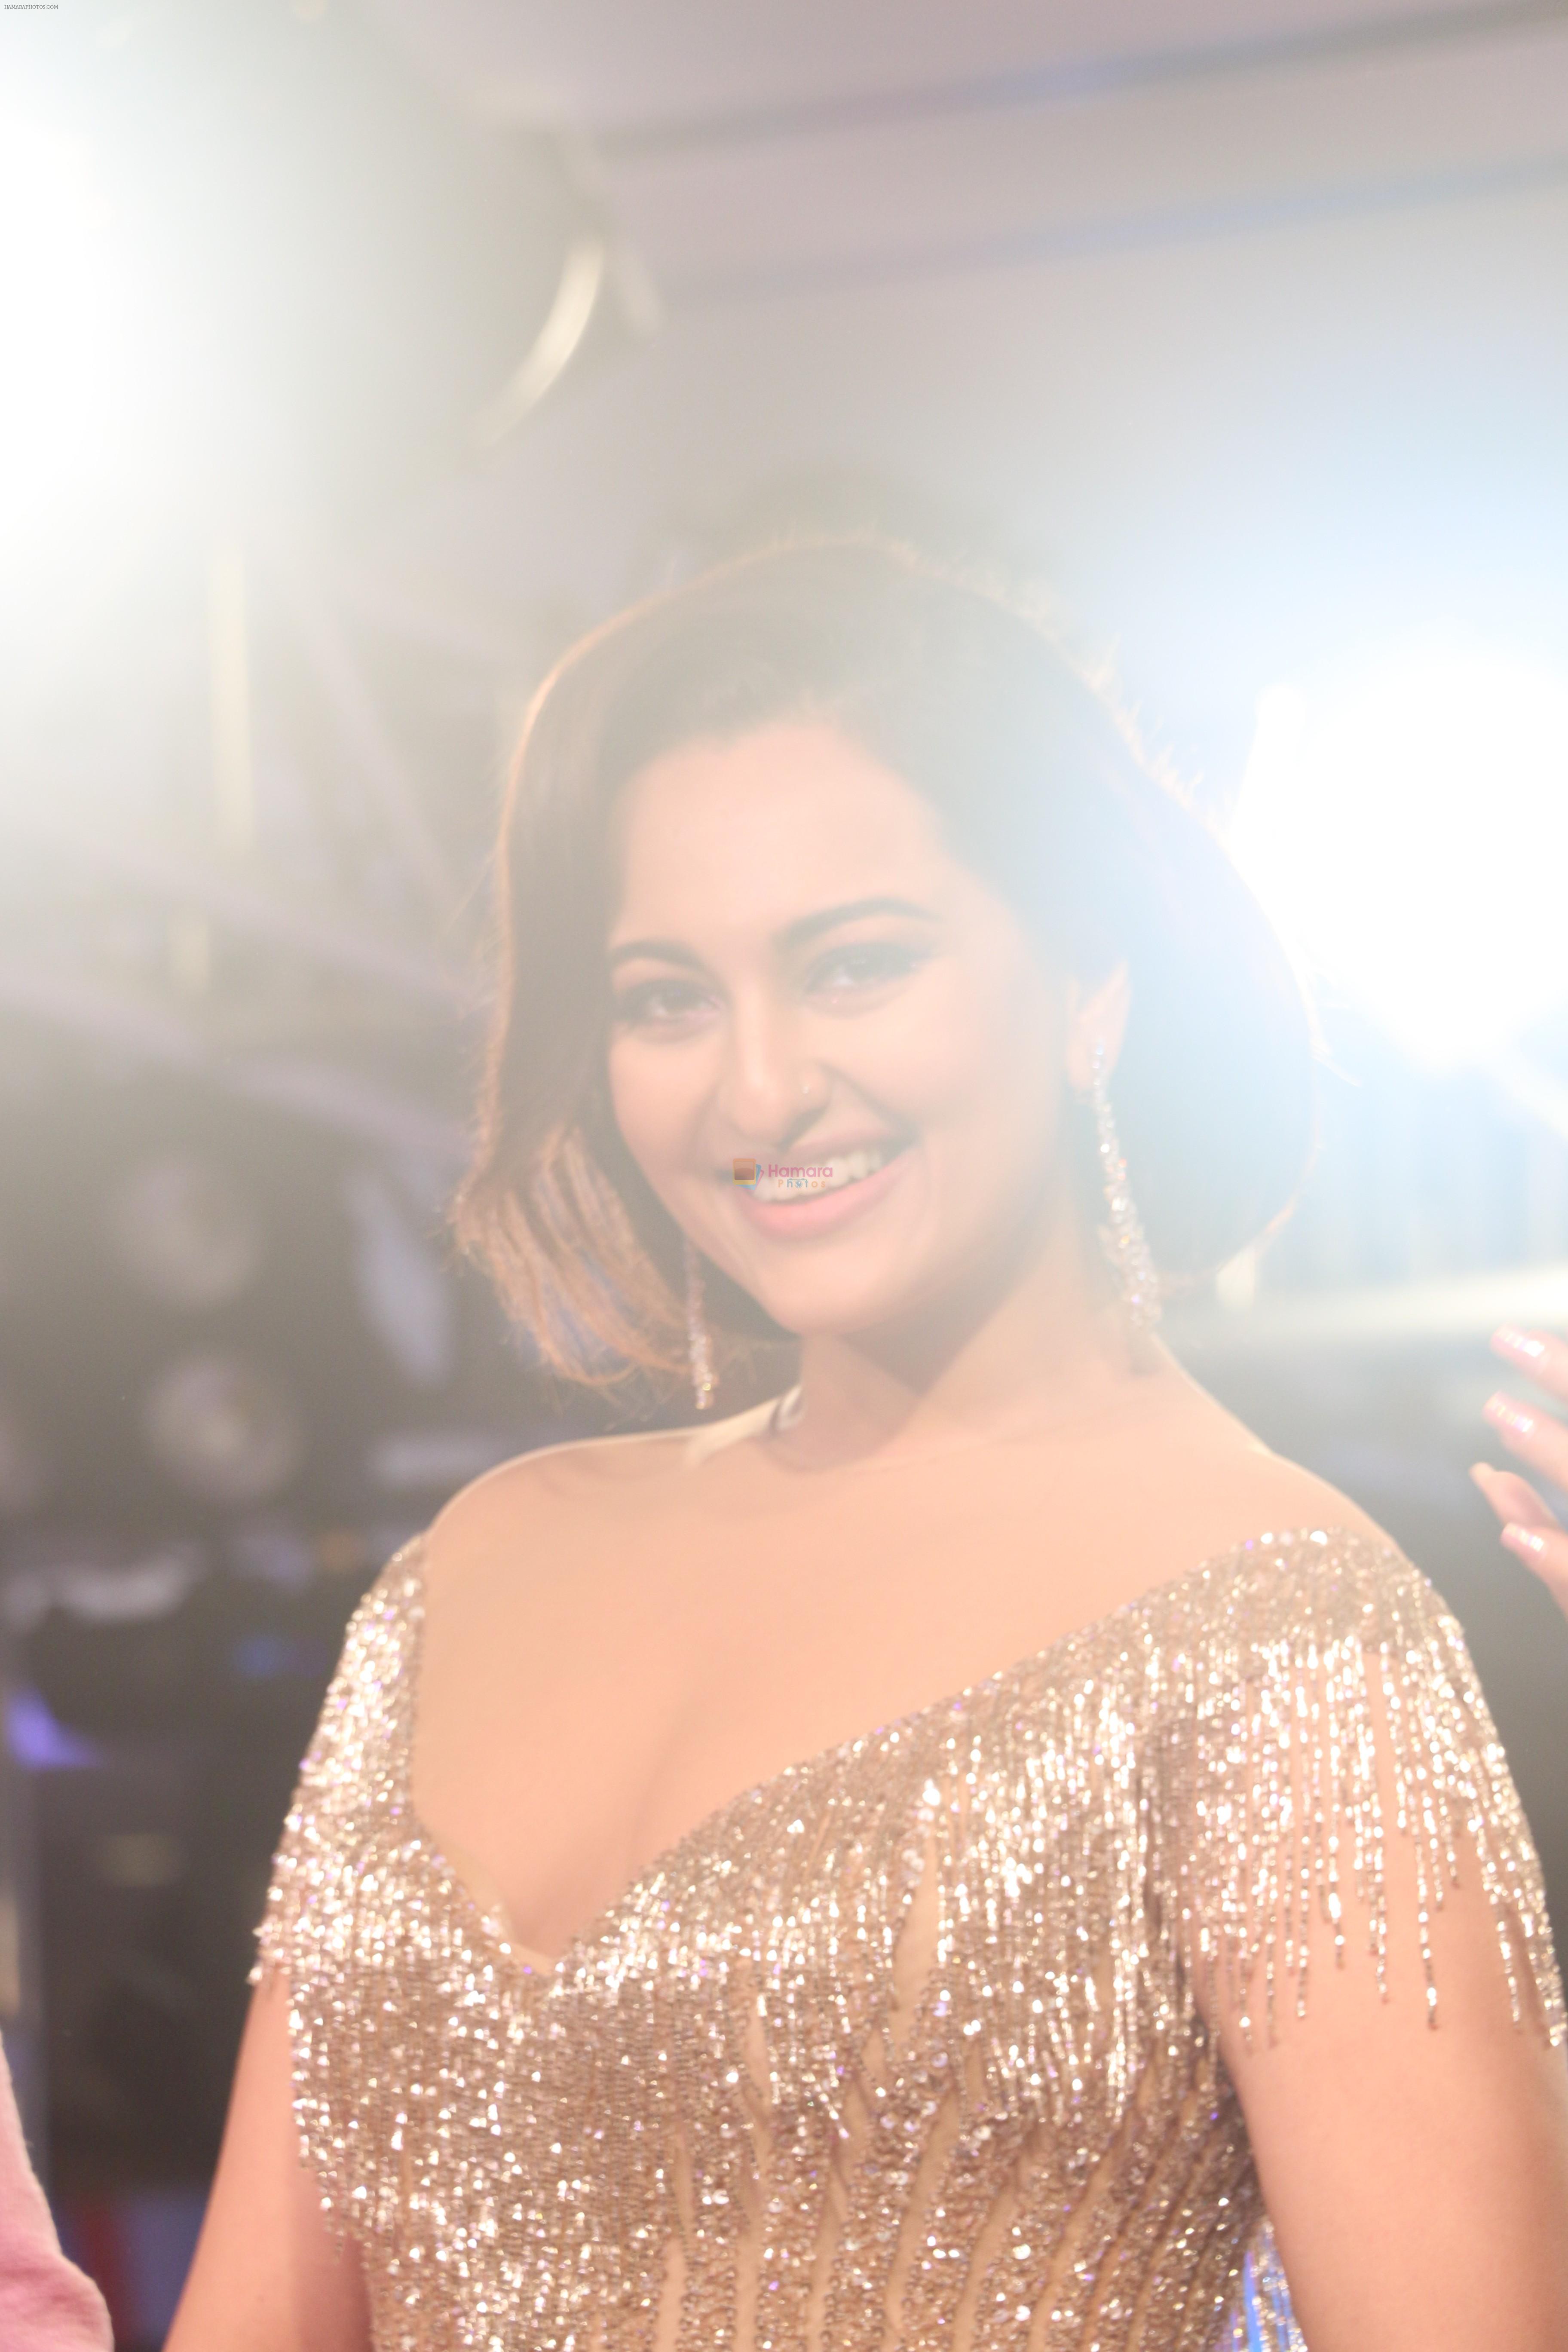 Sonakshi Sinha at the Streax Professional Retro Remix hair show in The Leela, andheri on 24th June 2019